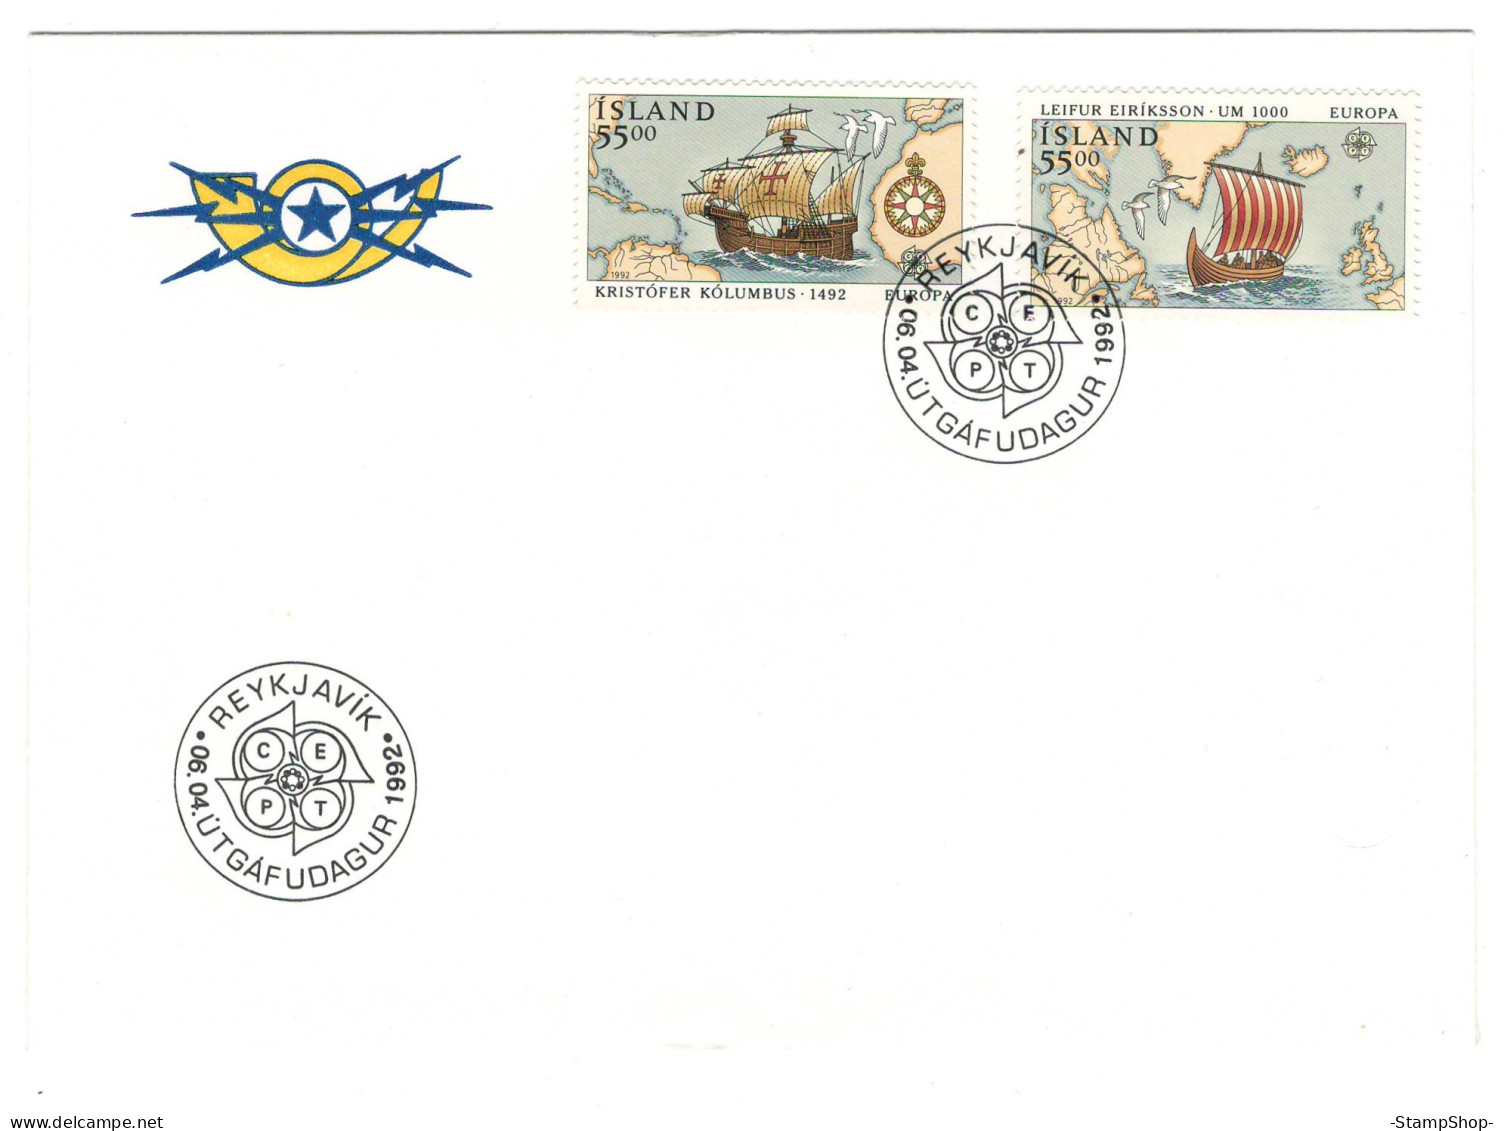 1992 Island - Europe: 500th Anniversary Of The Discovery Of America - FDC - BX2035 - Covers & Documents